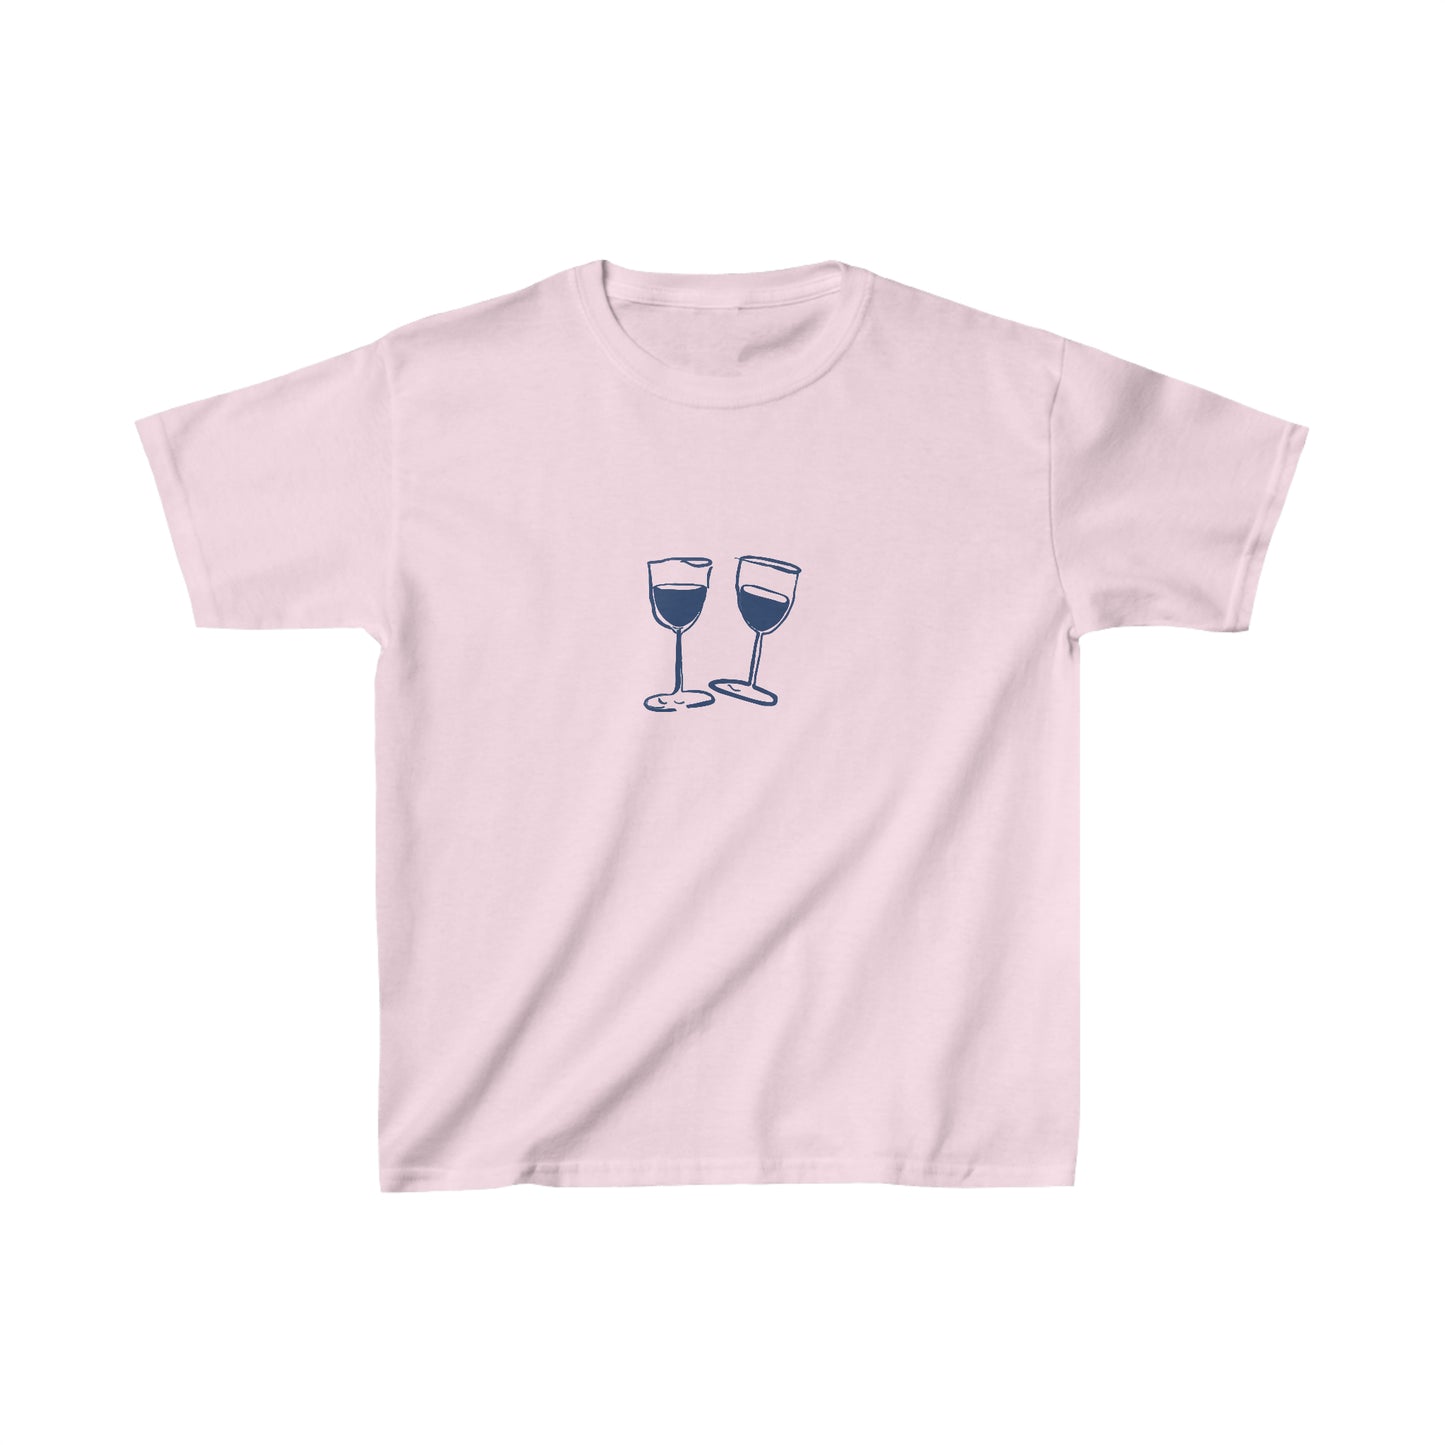 Cheers! Boxy Fit Baby Tee